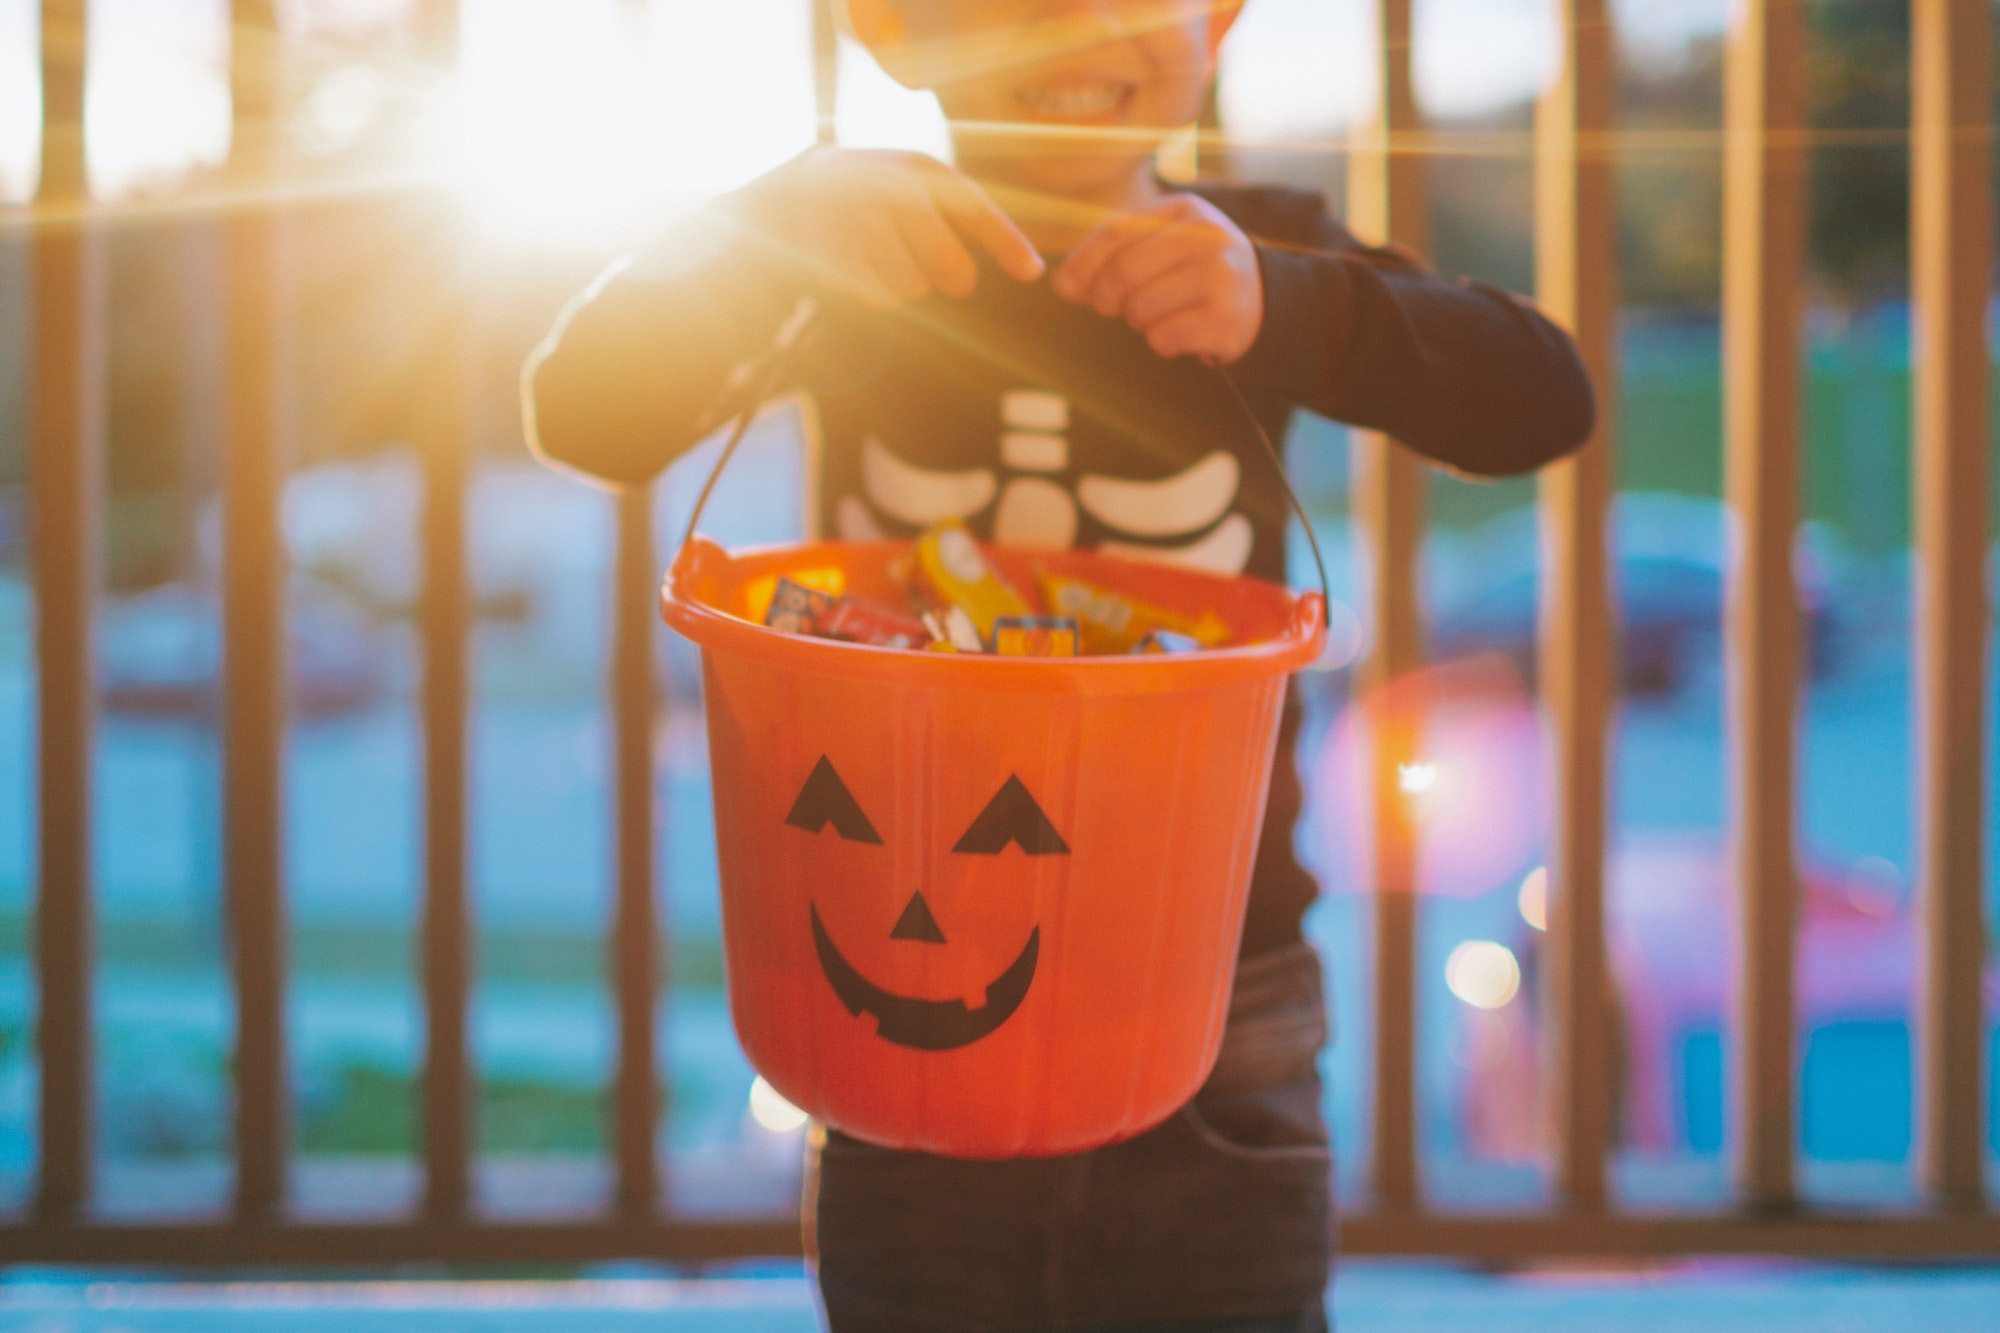 A little boy holding a bucket filled with Halloween candy.